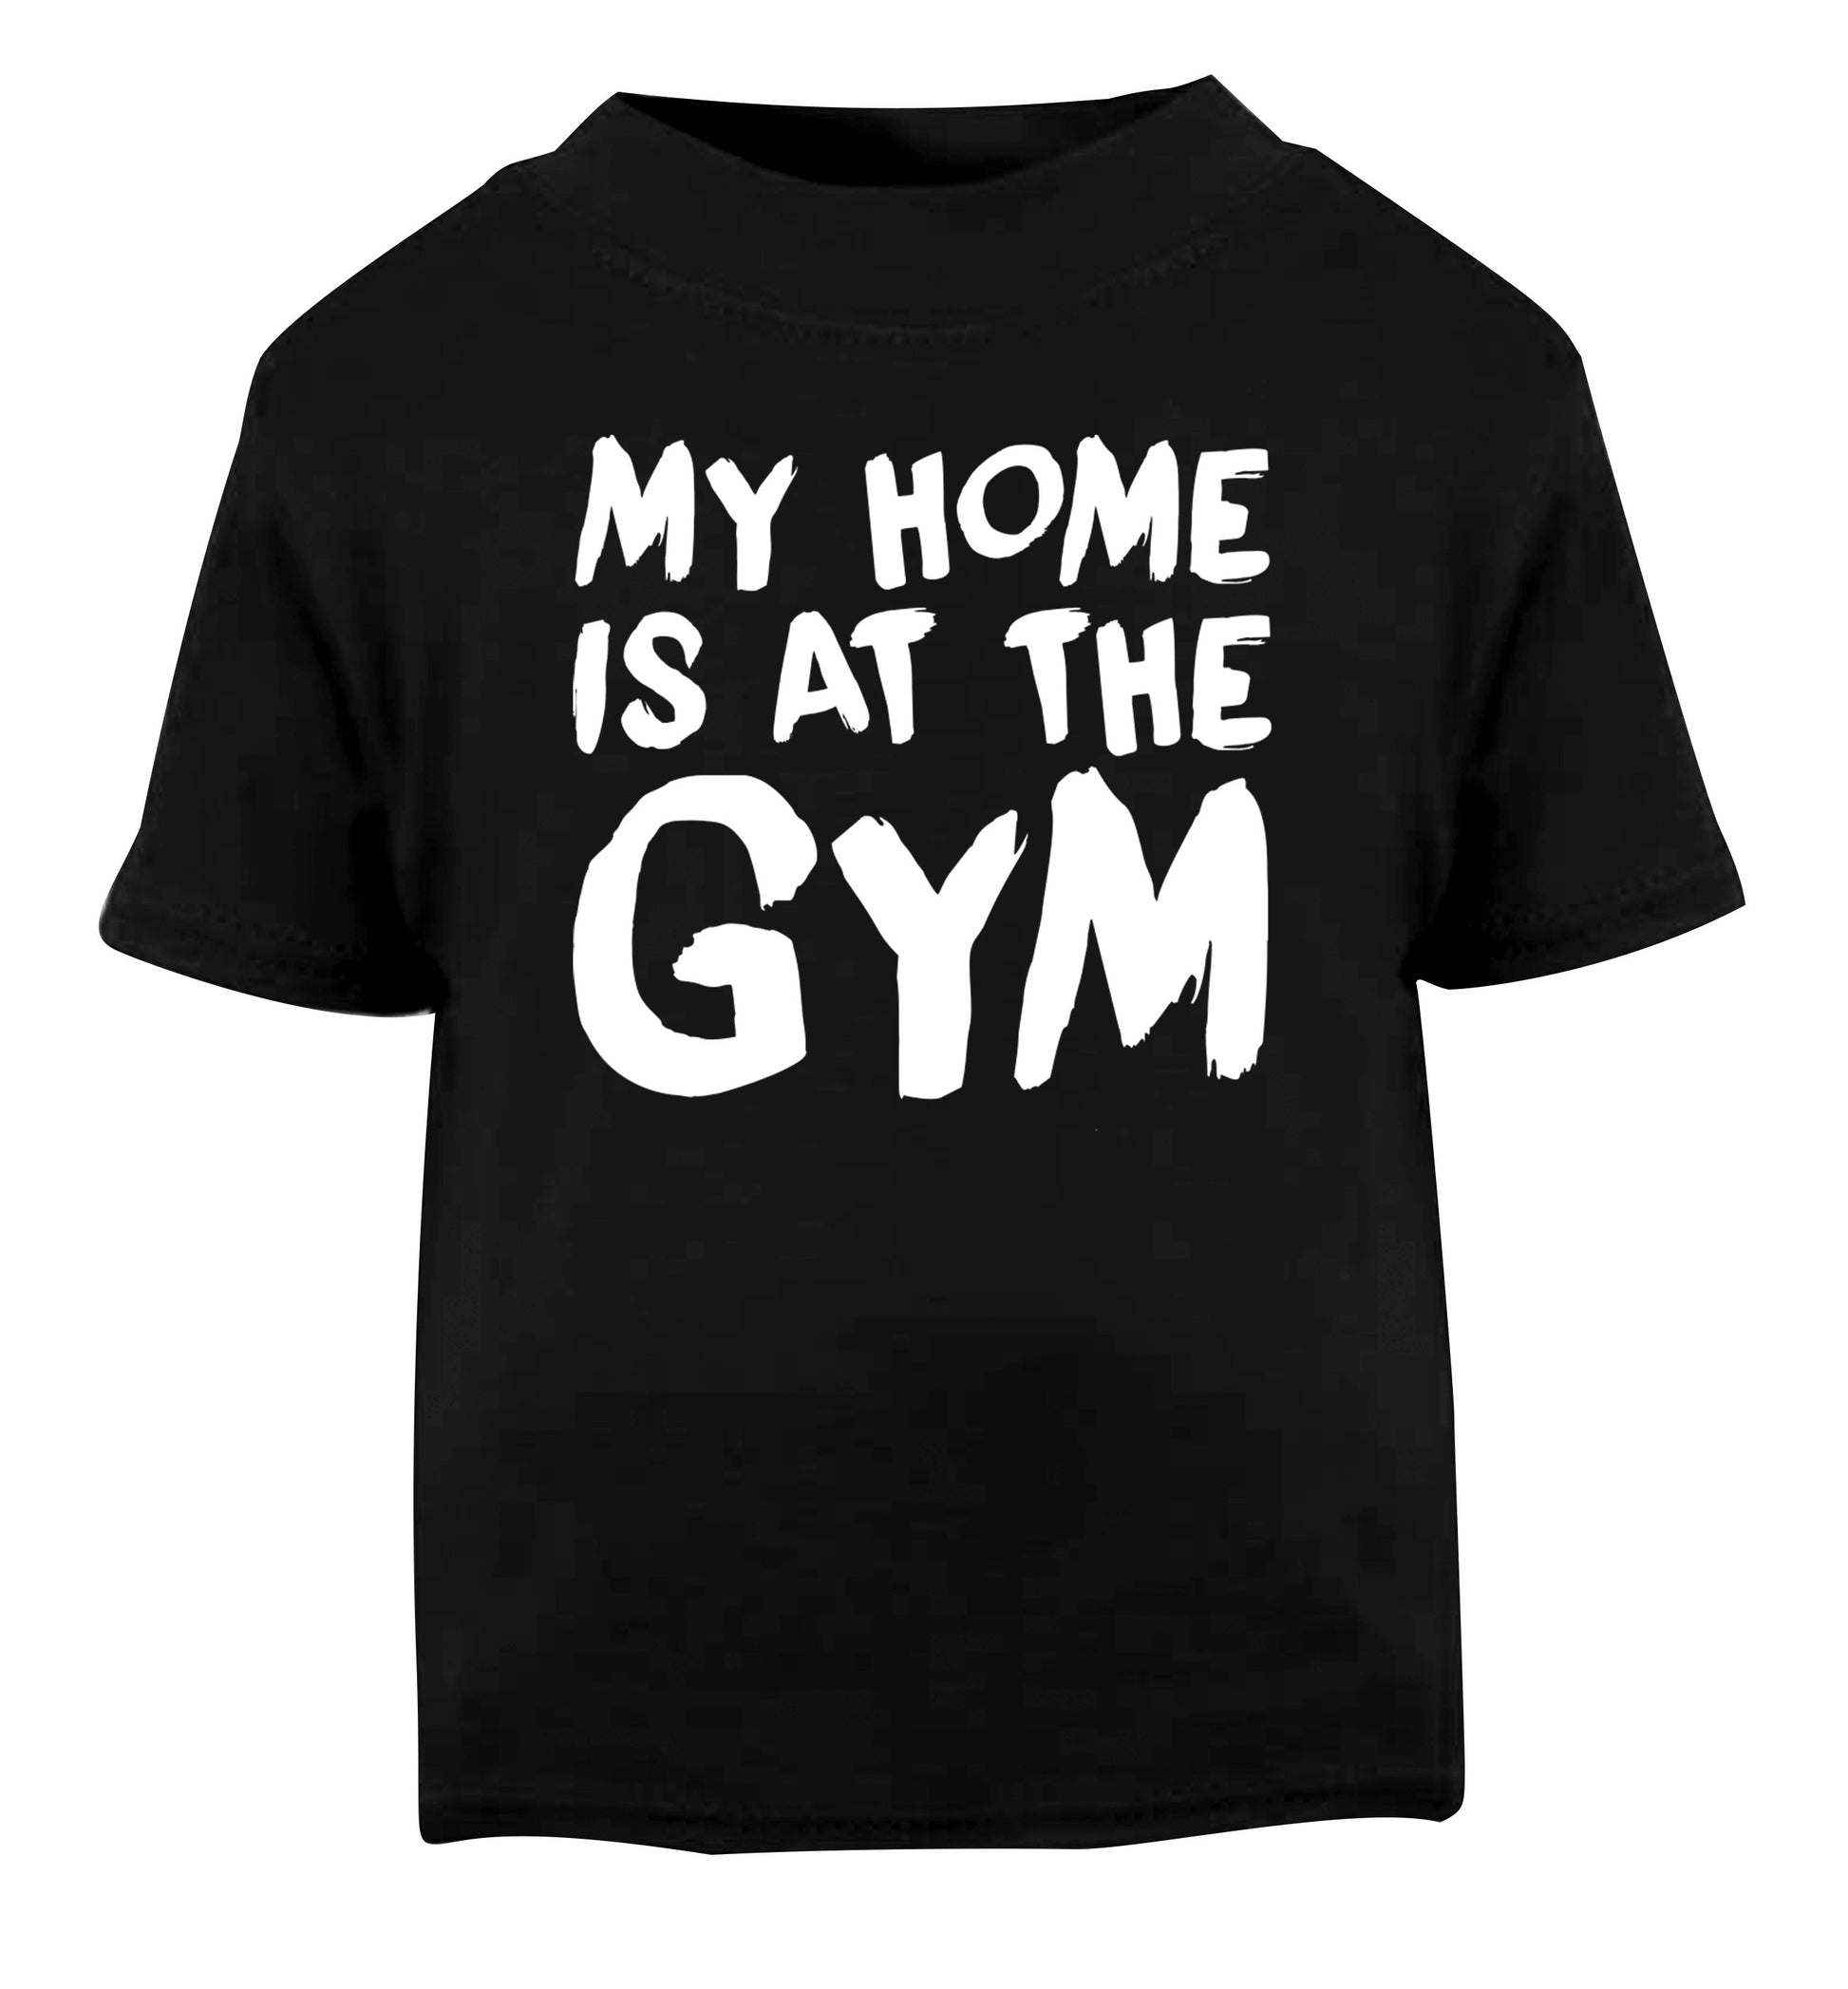 My home is at the gym Black Baby Toddler Tshirt 2 years